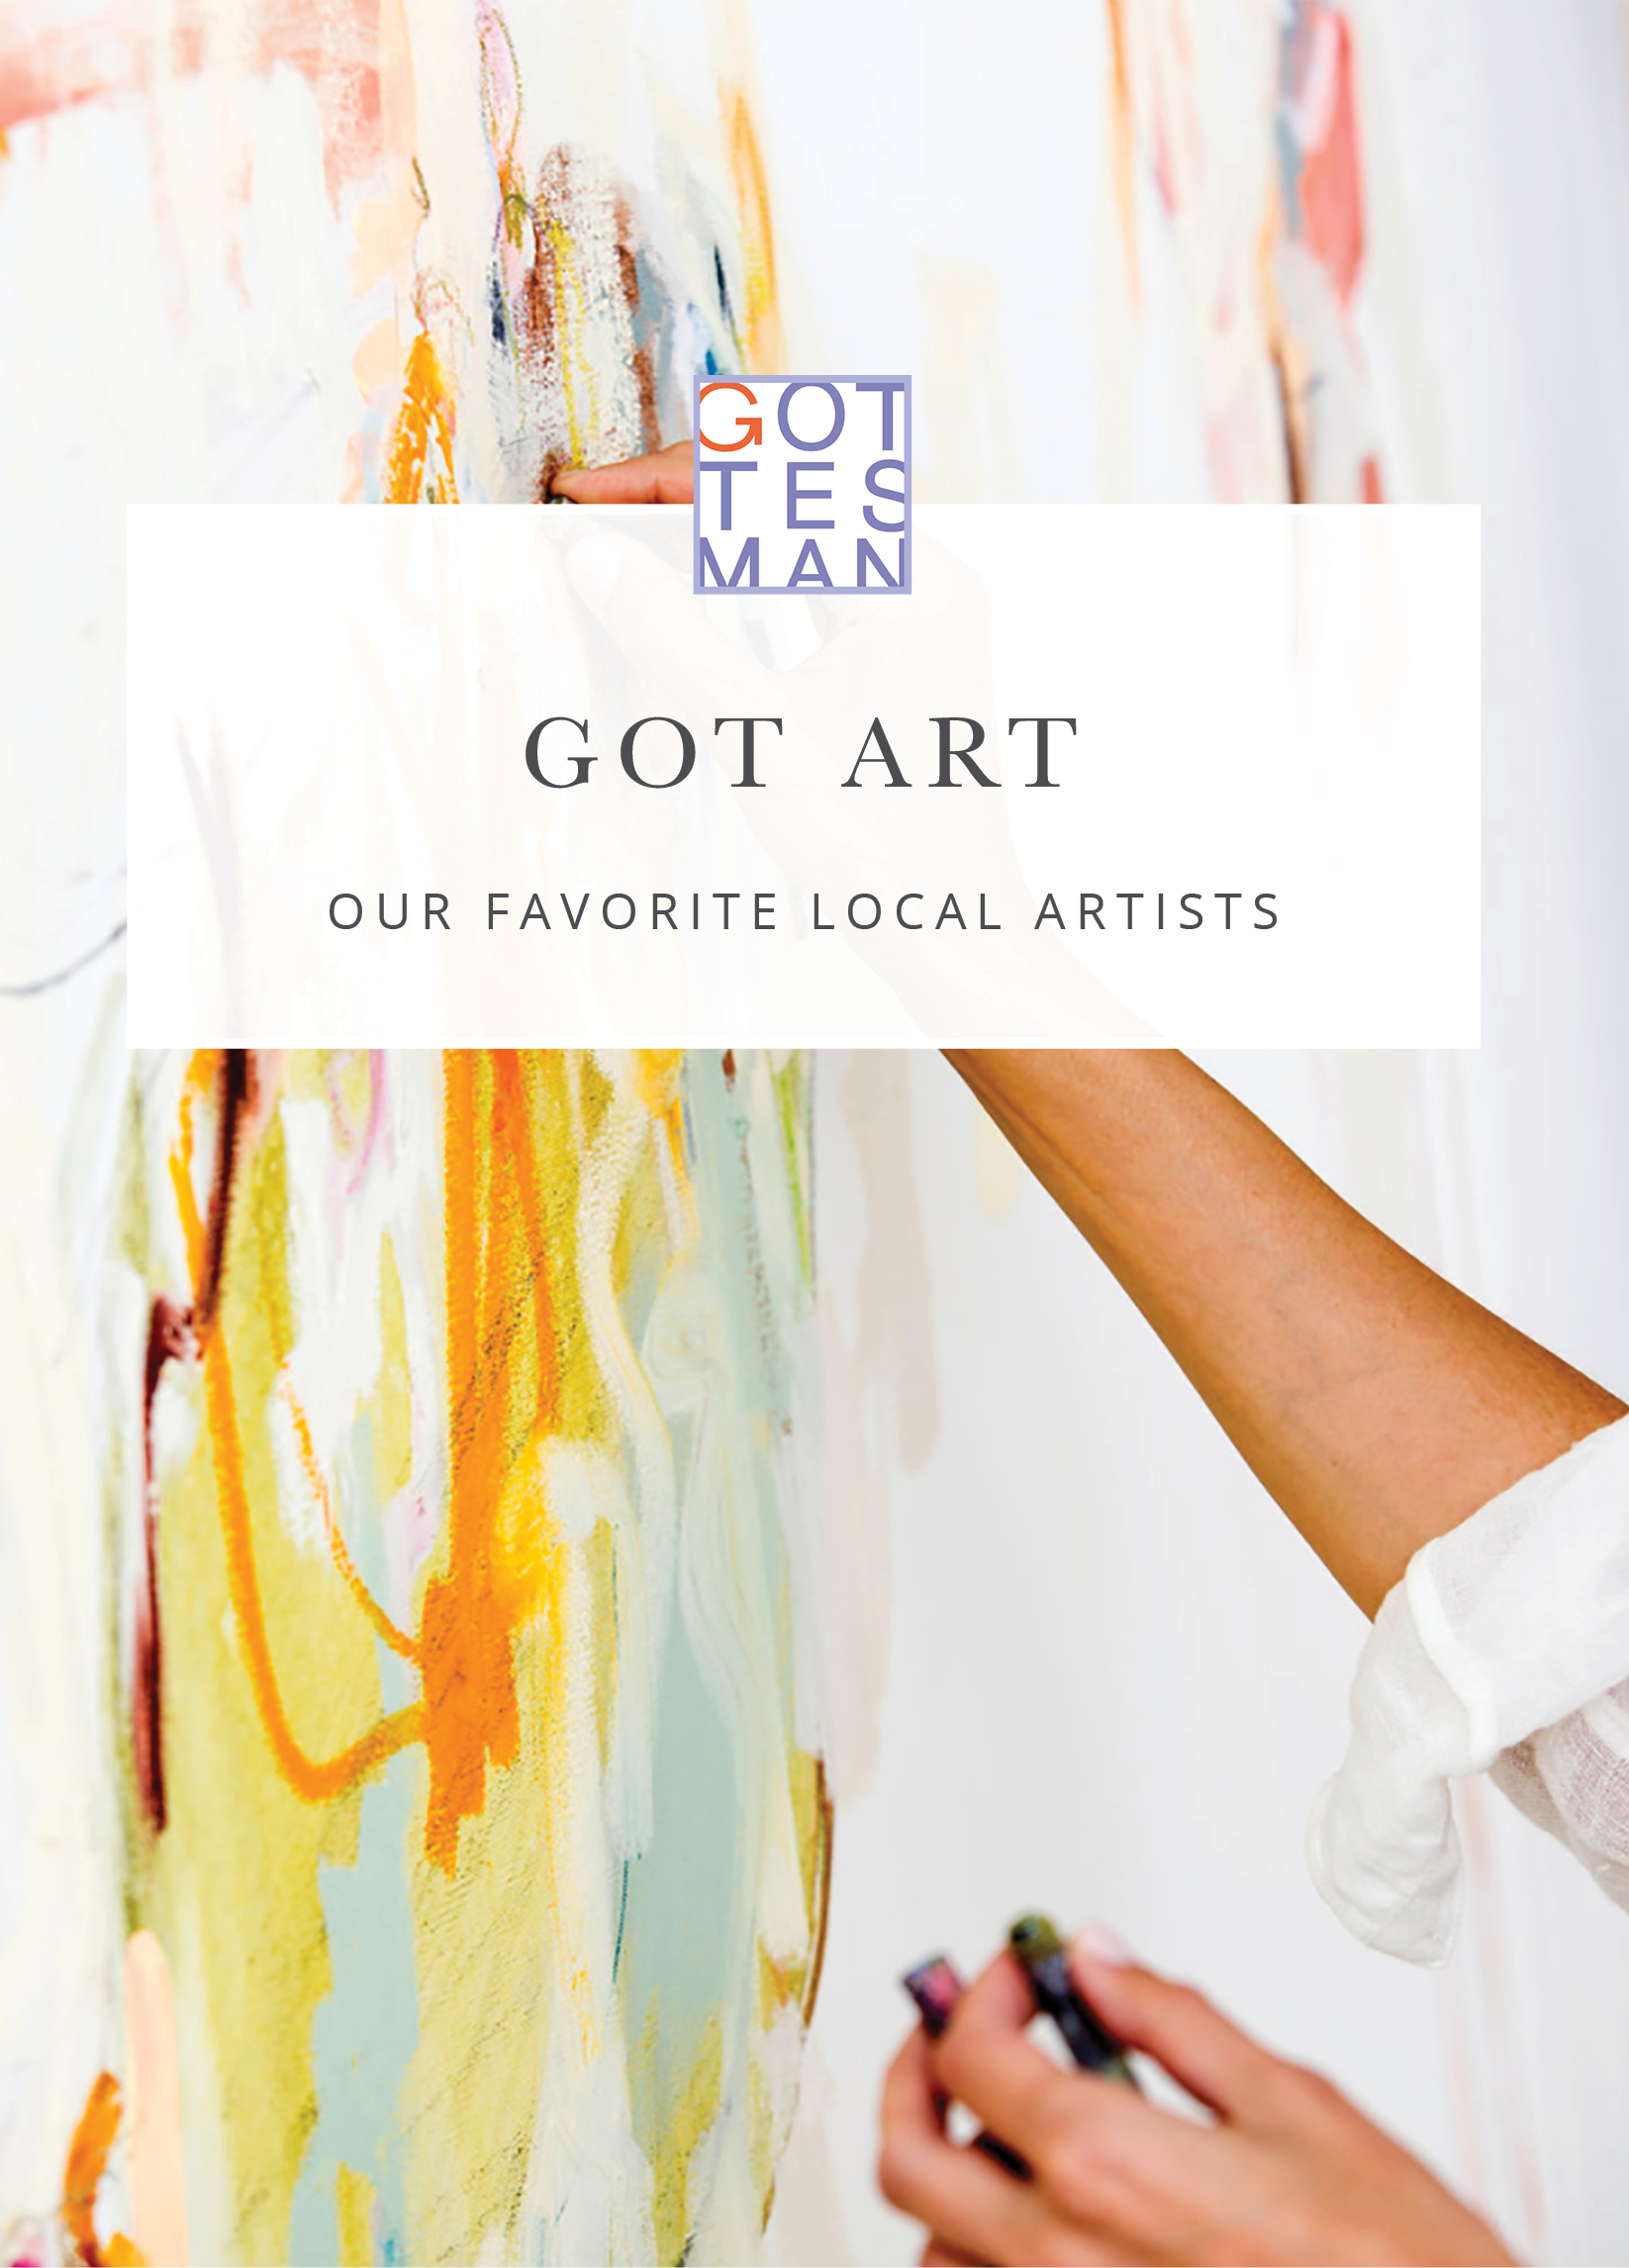 Painting with text overlay, "Got Art" Our Favorite Local Artist"